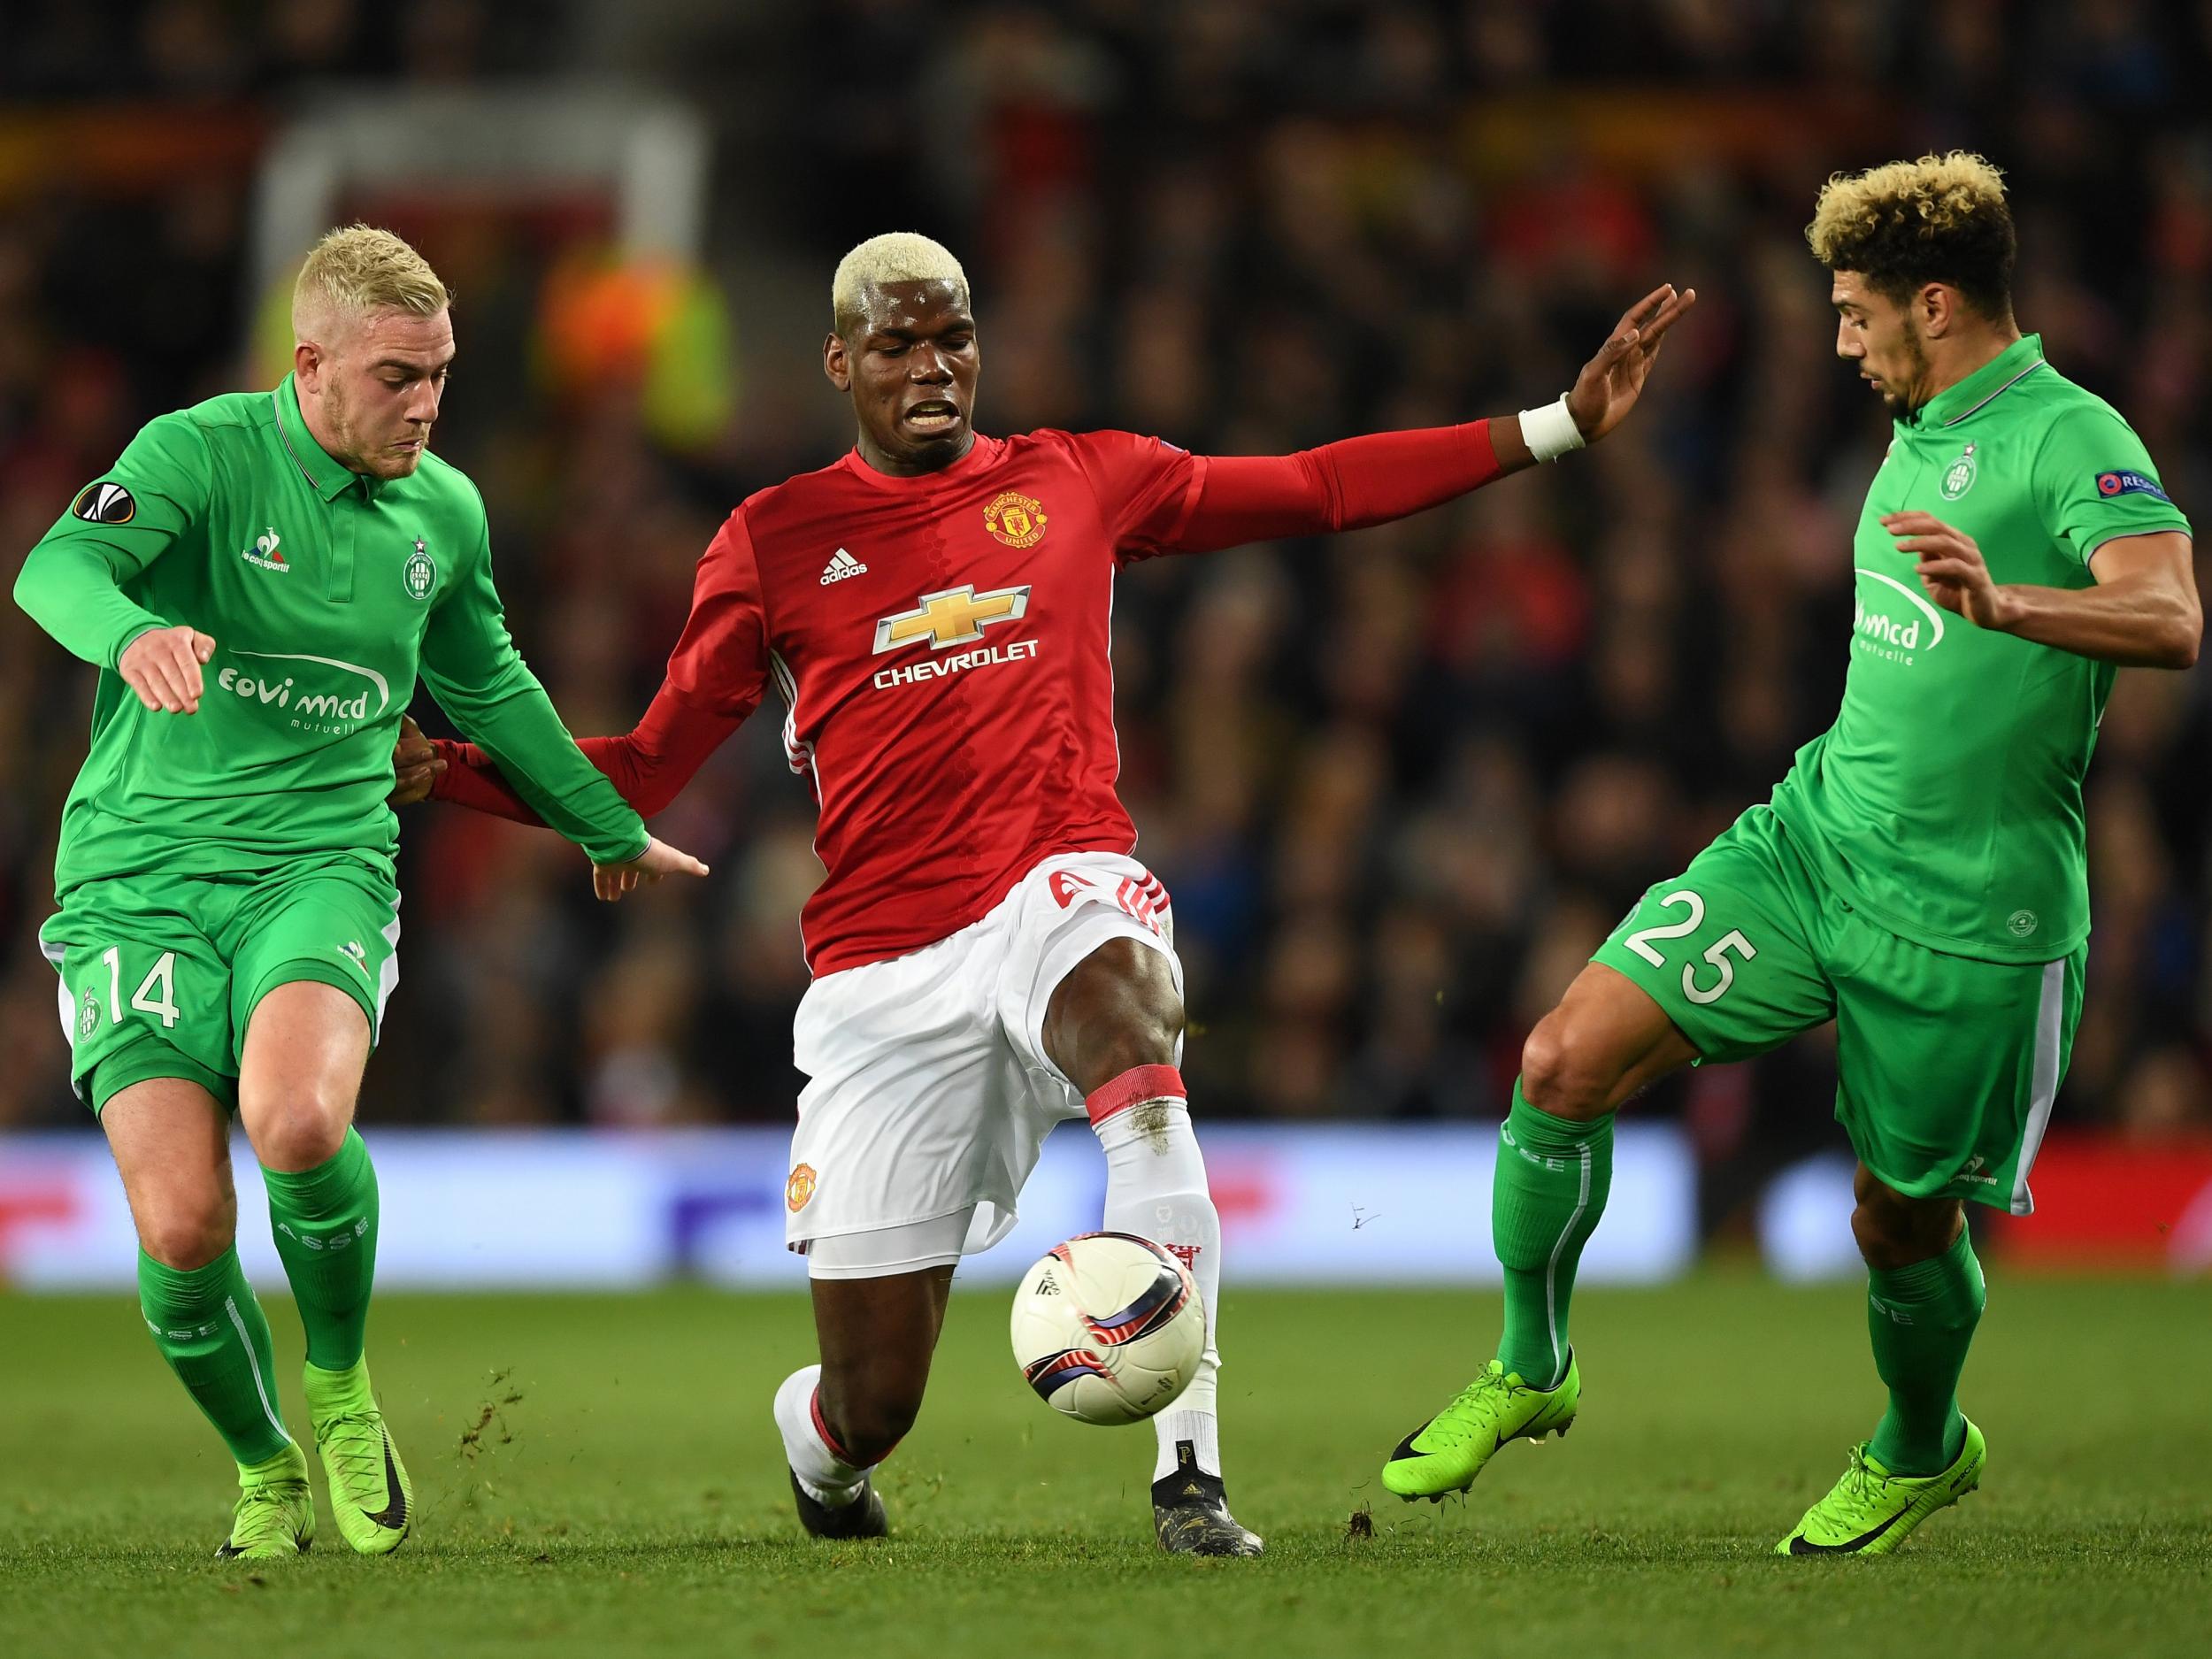 Pogba found time and space against St Etienne